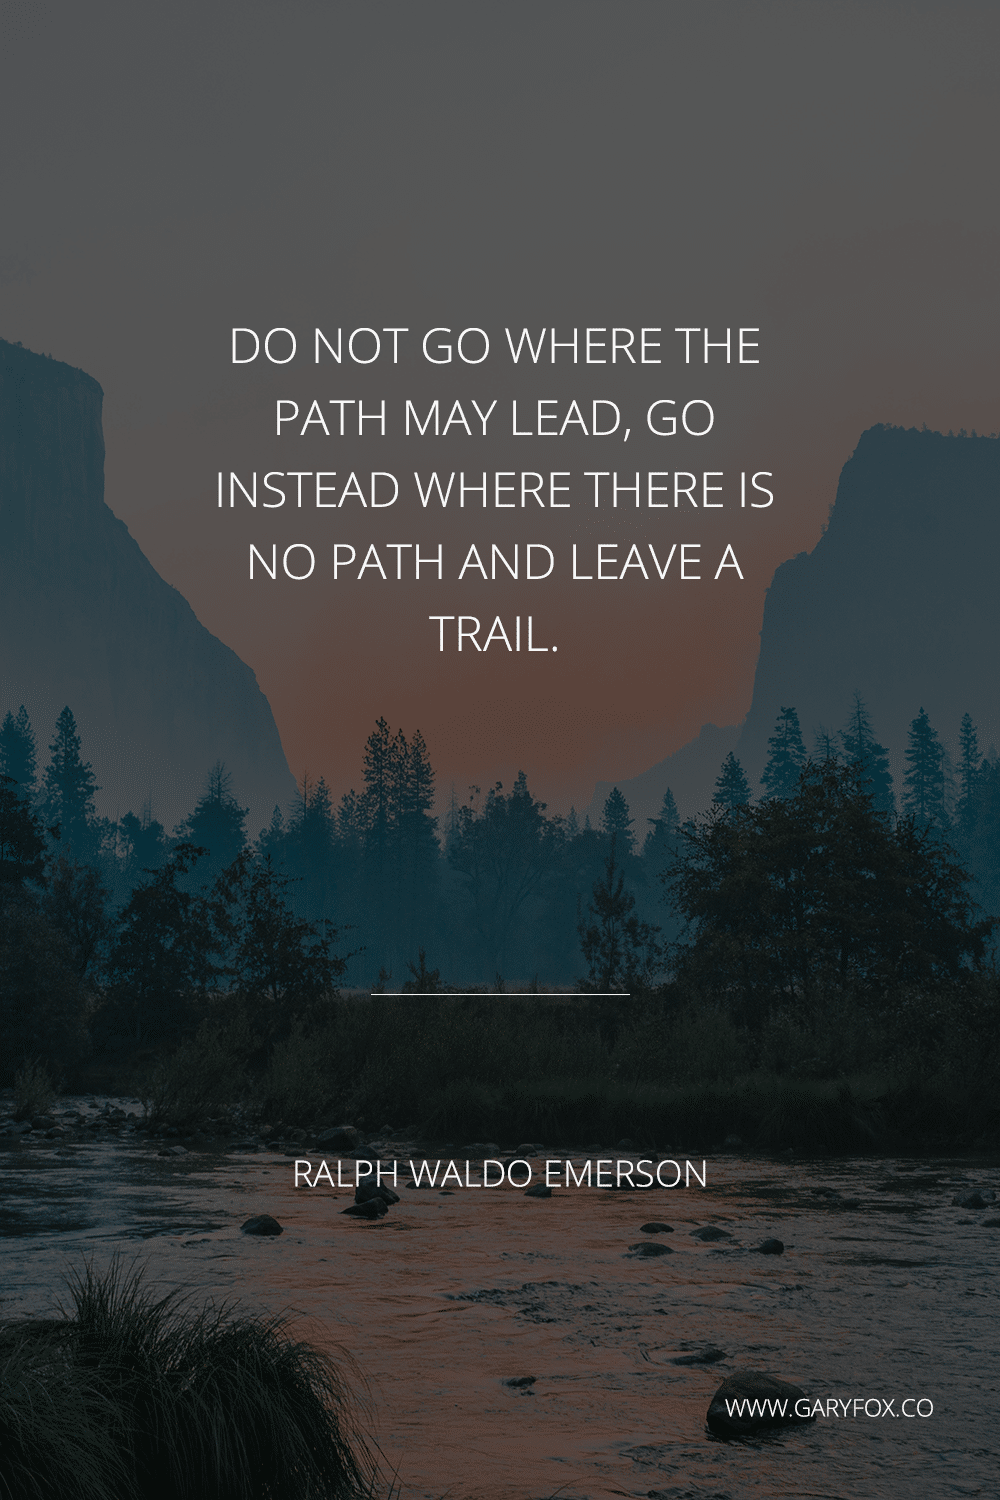 Do Not Go Where The Path May Lead, Go Instead Where There Is No Path And Leave A Trail. - Ralph Waldo Emerson